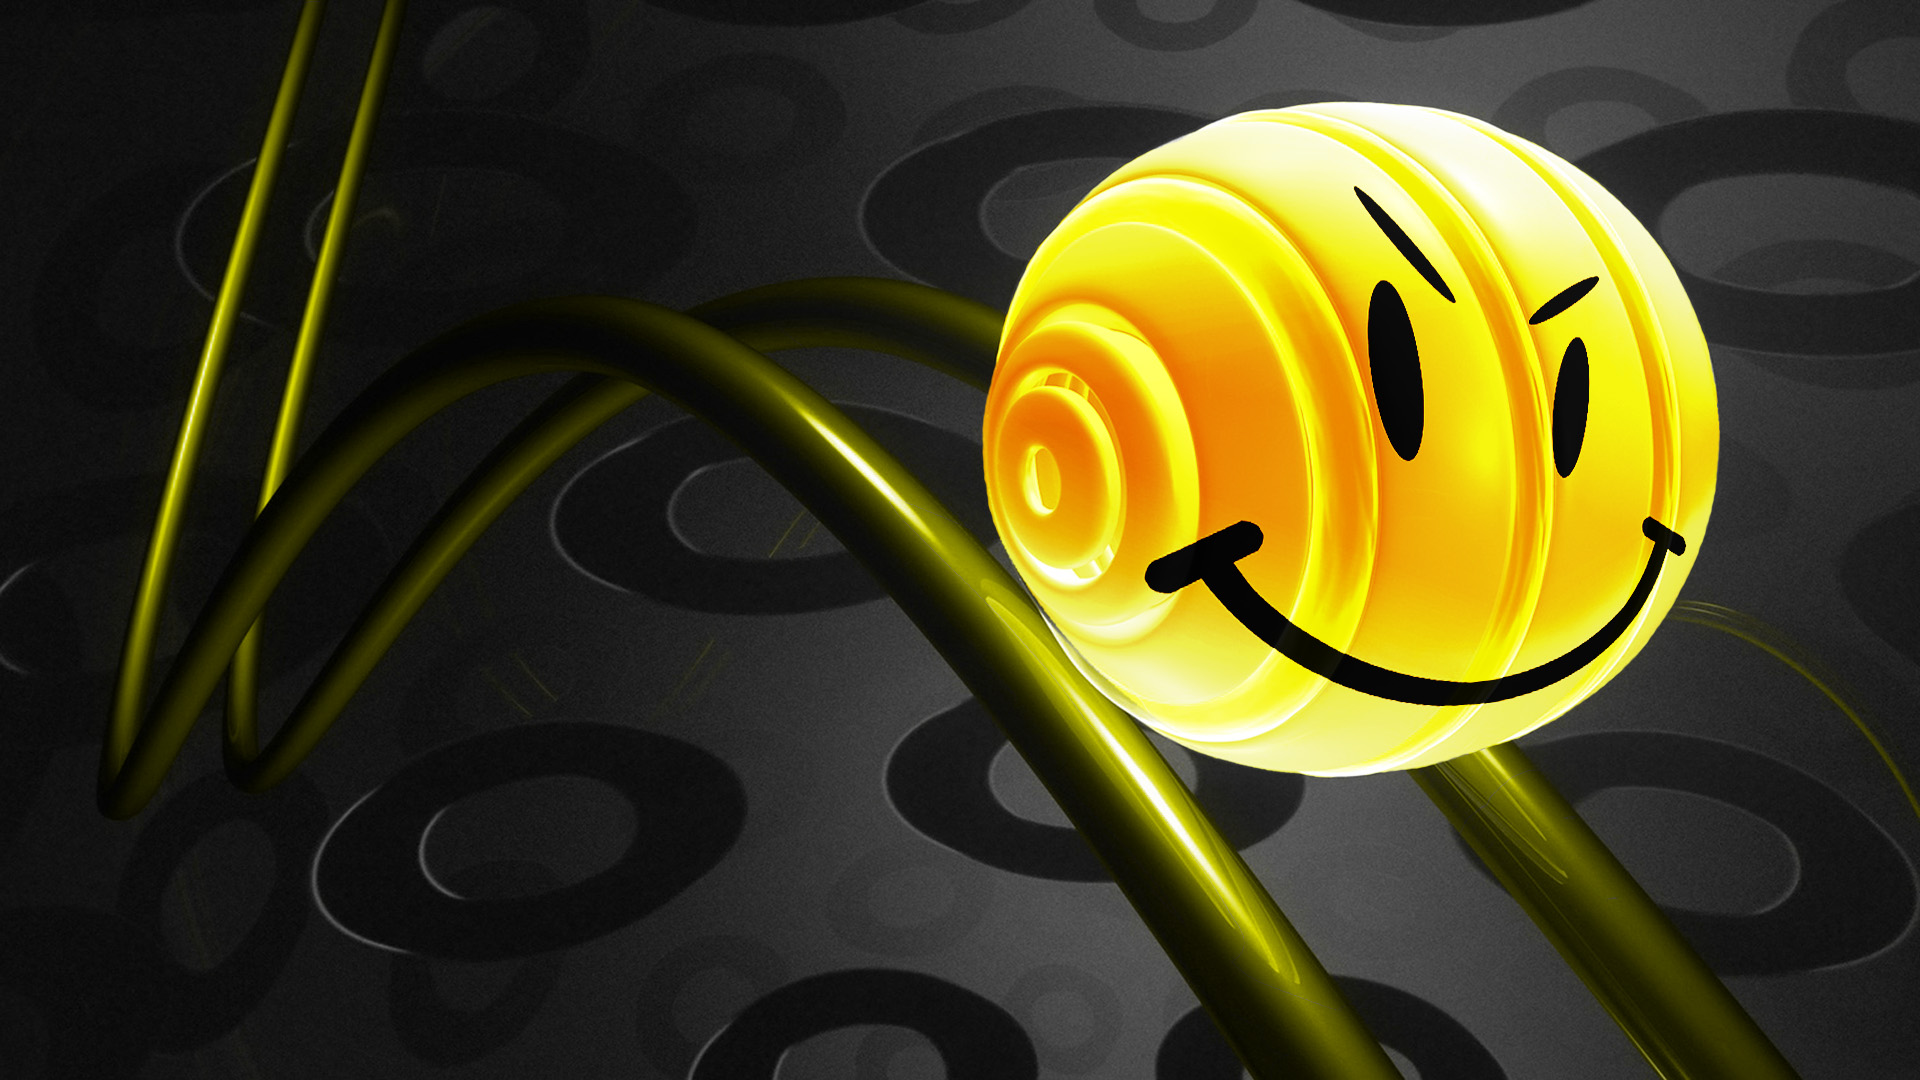 Smiley Faces Wallpapers HD